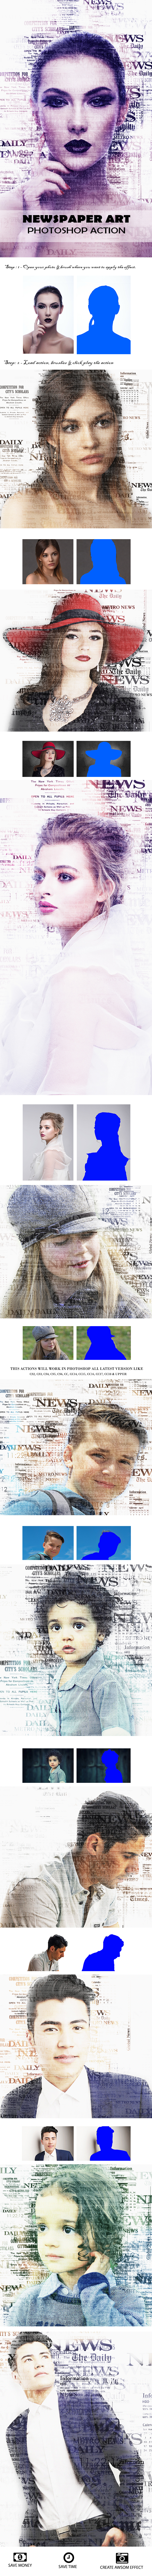 Newspaper Art :: Photoshop Action in Photoshop Shapes